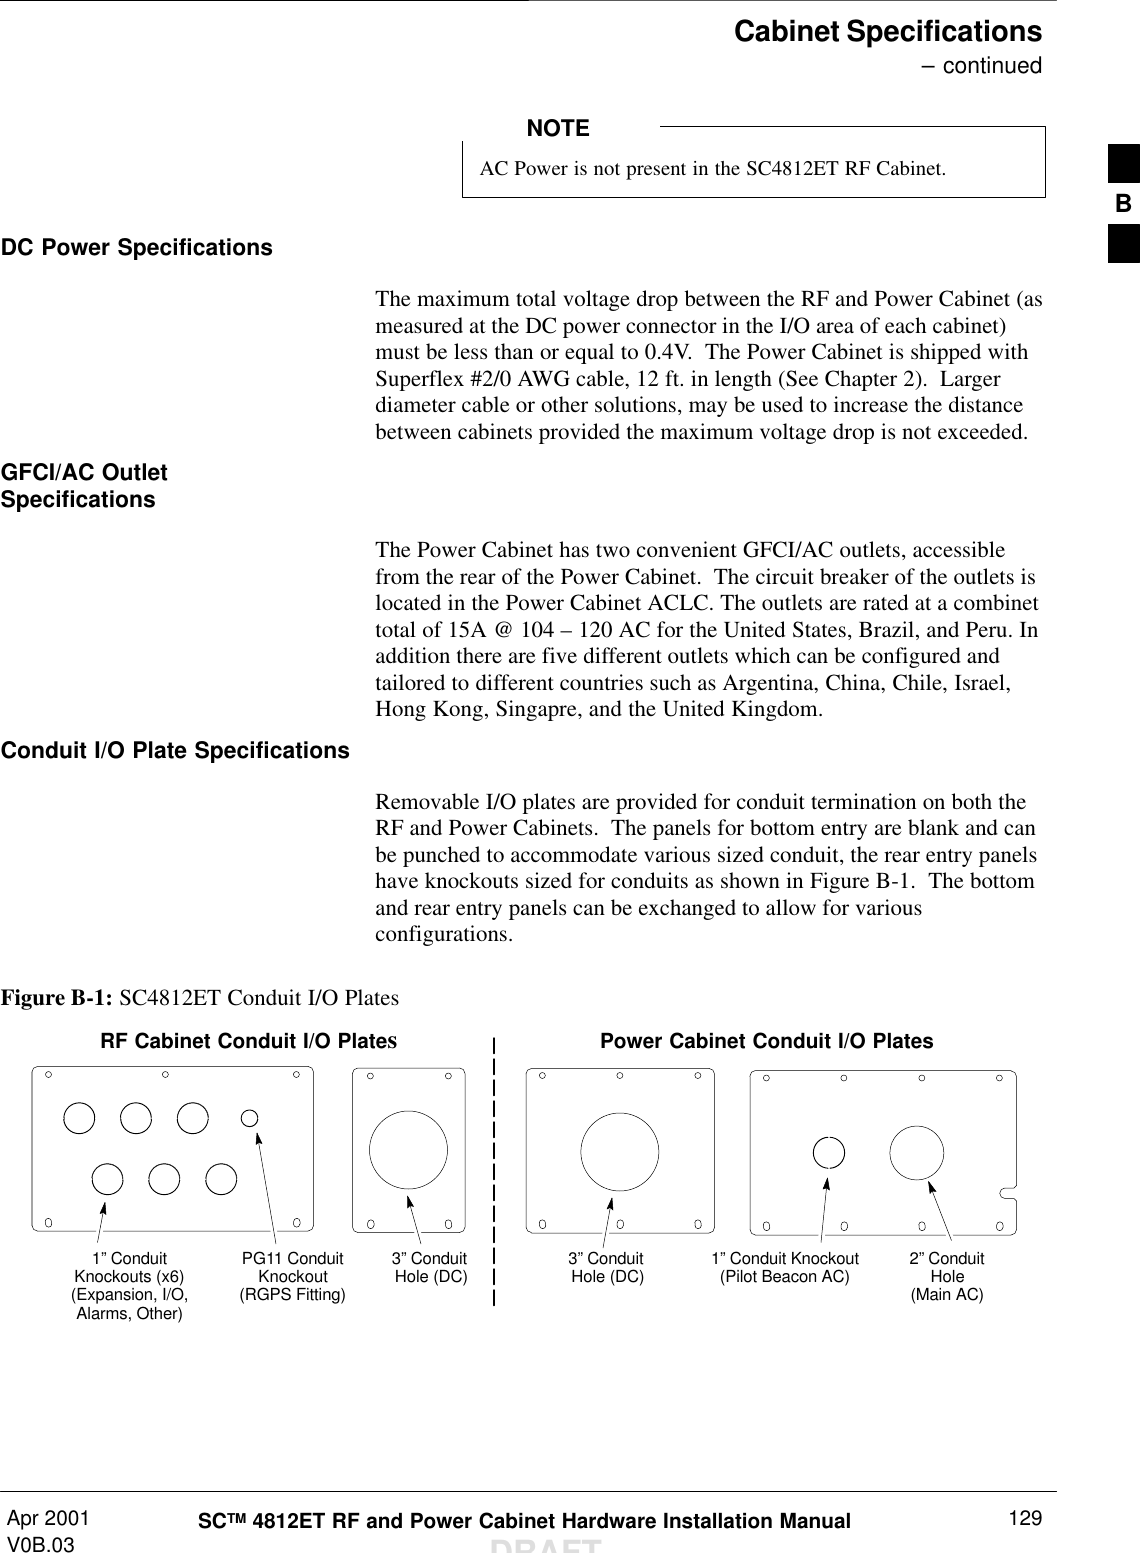 Cabinet Specifications – continuedApr 2001V0B.03 SCTM 4812ET RF and Power Cabinet Hardware Installation ManualDRAFT129AC Power is not present in the SC4812ET RF Cabinet.NOTEDC Power SpecificationsThe maximum total voltage drop between the RF and Power Cabinet (asmeasured at the DC power connector in the I/O area of each cabinet)must be less than or equal to 0.4V.  The Power Cabinet is shipped withSuperflex #2/0 AWG cable, 12 ft. in length (See Chapter 2).  Largerdiameter cable or other solutions, may be used to increase the distancebetween cabinets provided the maximum voltage drop is not exceeded.GFCI/AC OutletSpecificationsThe Power Cabinet has two convenient GFCI/AC outlets, accessiblefrom the rear of the Power Cabinet.  The circuit breaker of the outlets islocated in the Power Cabinet ACLC. The outlets are rated at a combinettotal of 15A @ 104 – 120 AC for the United States, Brazil, and Peru. Inaddition there are five different outlets which can be configured andtailored to different countries such as Argentina, China, Chile, Israel,Hong Kong, Singapre, and the United Kingdom.Conduit I/O Plate SpecificationsRemovable I/O plates are provided for conduit termination on both theRF and Power Cabinets.  The panels for bottom entry are blank and canbe punched to accommodate various sized conduit, the rear entry panelshave knockouts sized for conduits as shown in Figure B-1.  The bottomand rear entry panels can be exchanged to allow for variousconfigurations.Figure B-1: SC4812ET Conduit I/O PlatesPower Cabinet Conduit I/O PlatesRF Cabinet Conduit I/O Plates2” ConduitHole(Main AC)1” Conduit Knockout(Pilot Beacon AC)3” Conduit Hole (DC)3” Conduit Hole (DC)PG11 ConduitKnockout(RGPS Fitting)1” ConduitKnockouts (x6)(Expansion, I/O,Alarms, Other)B